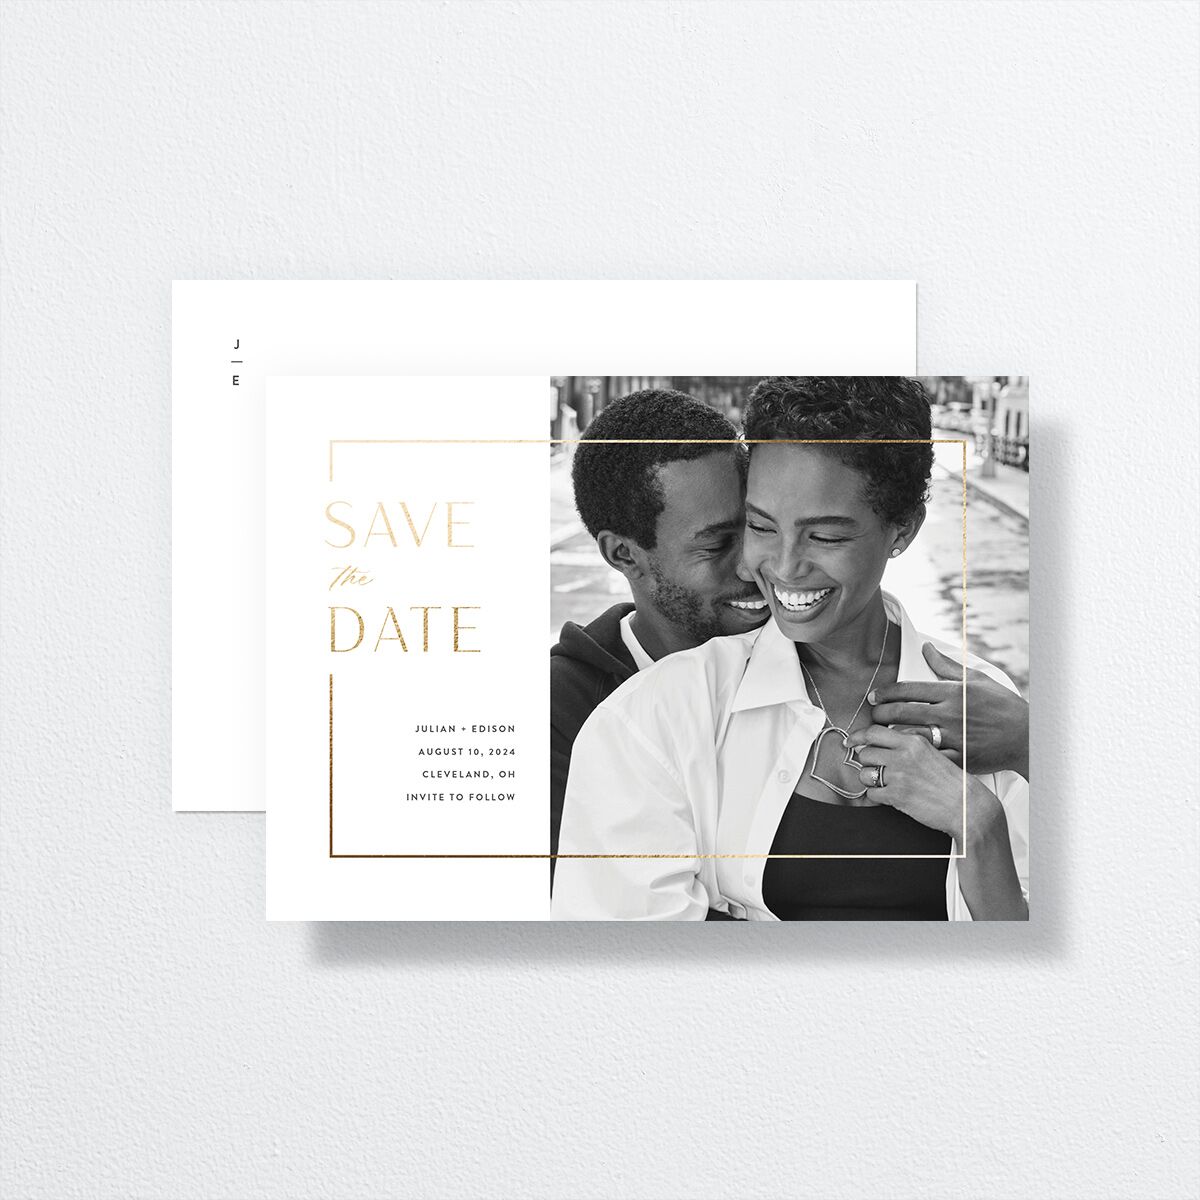 Modern Minimalist Save The Date Cards by Vera Wang front-and-back